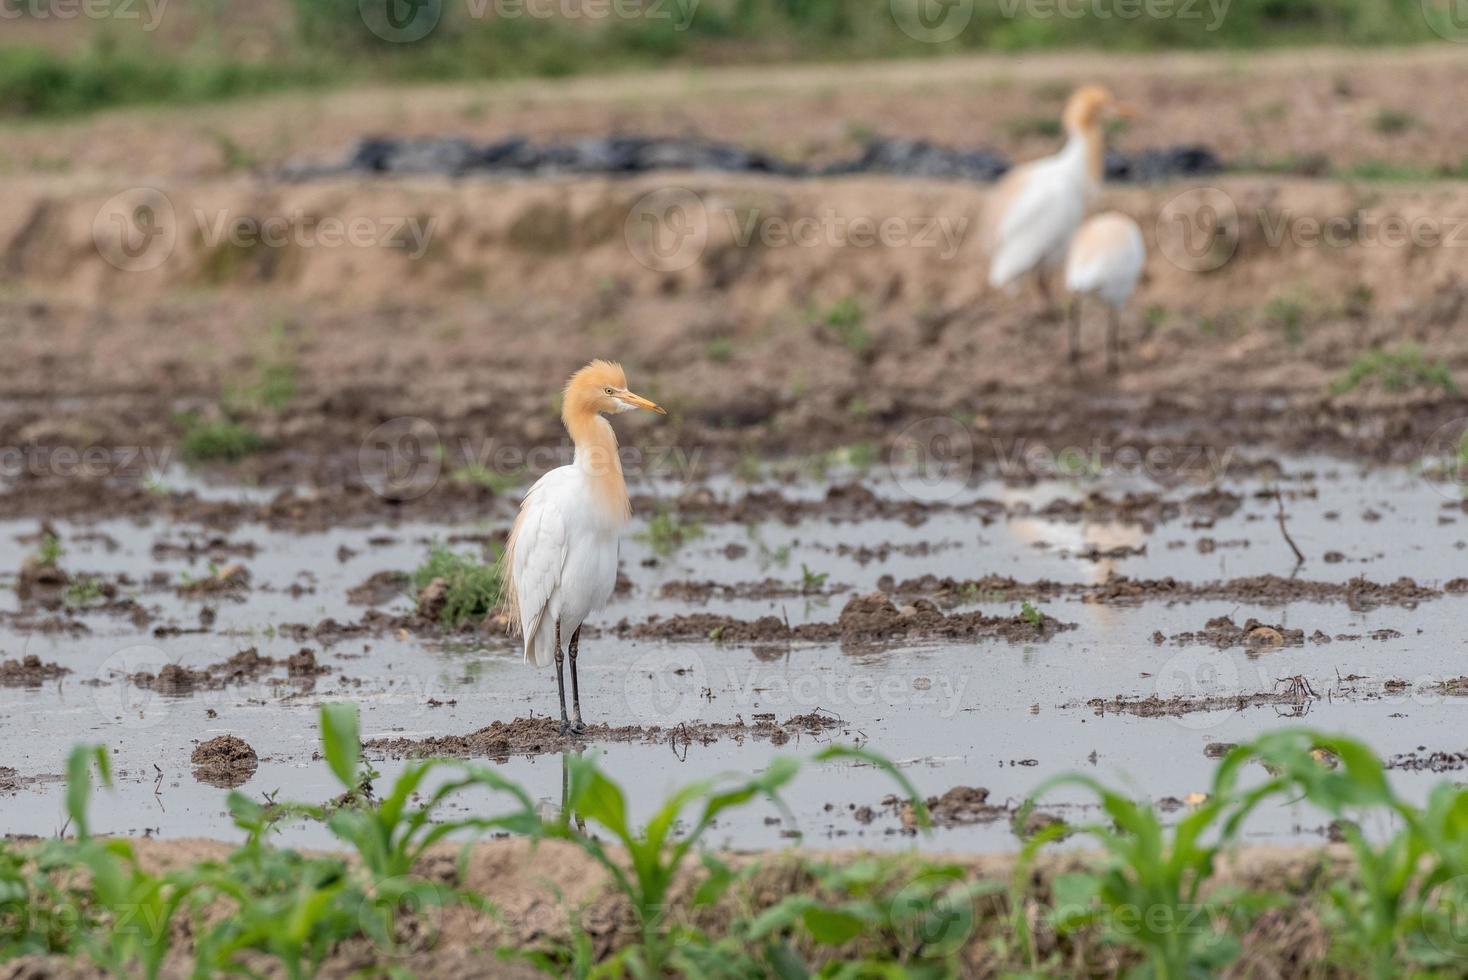 Cattle egrets stay in the fields for food, rest and fly photo